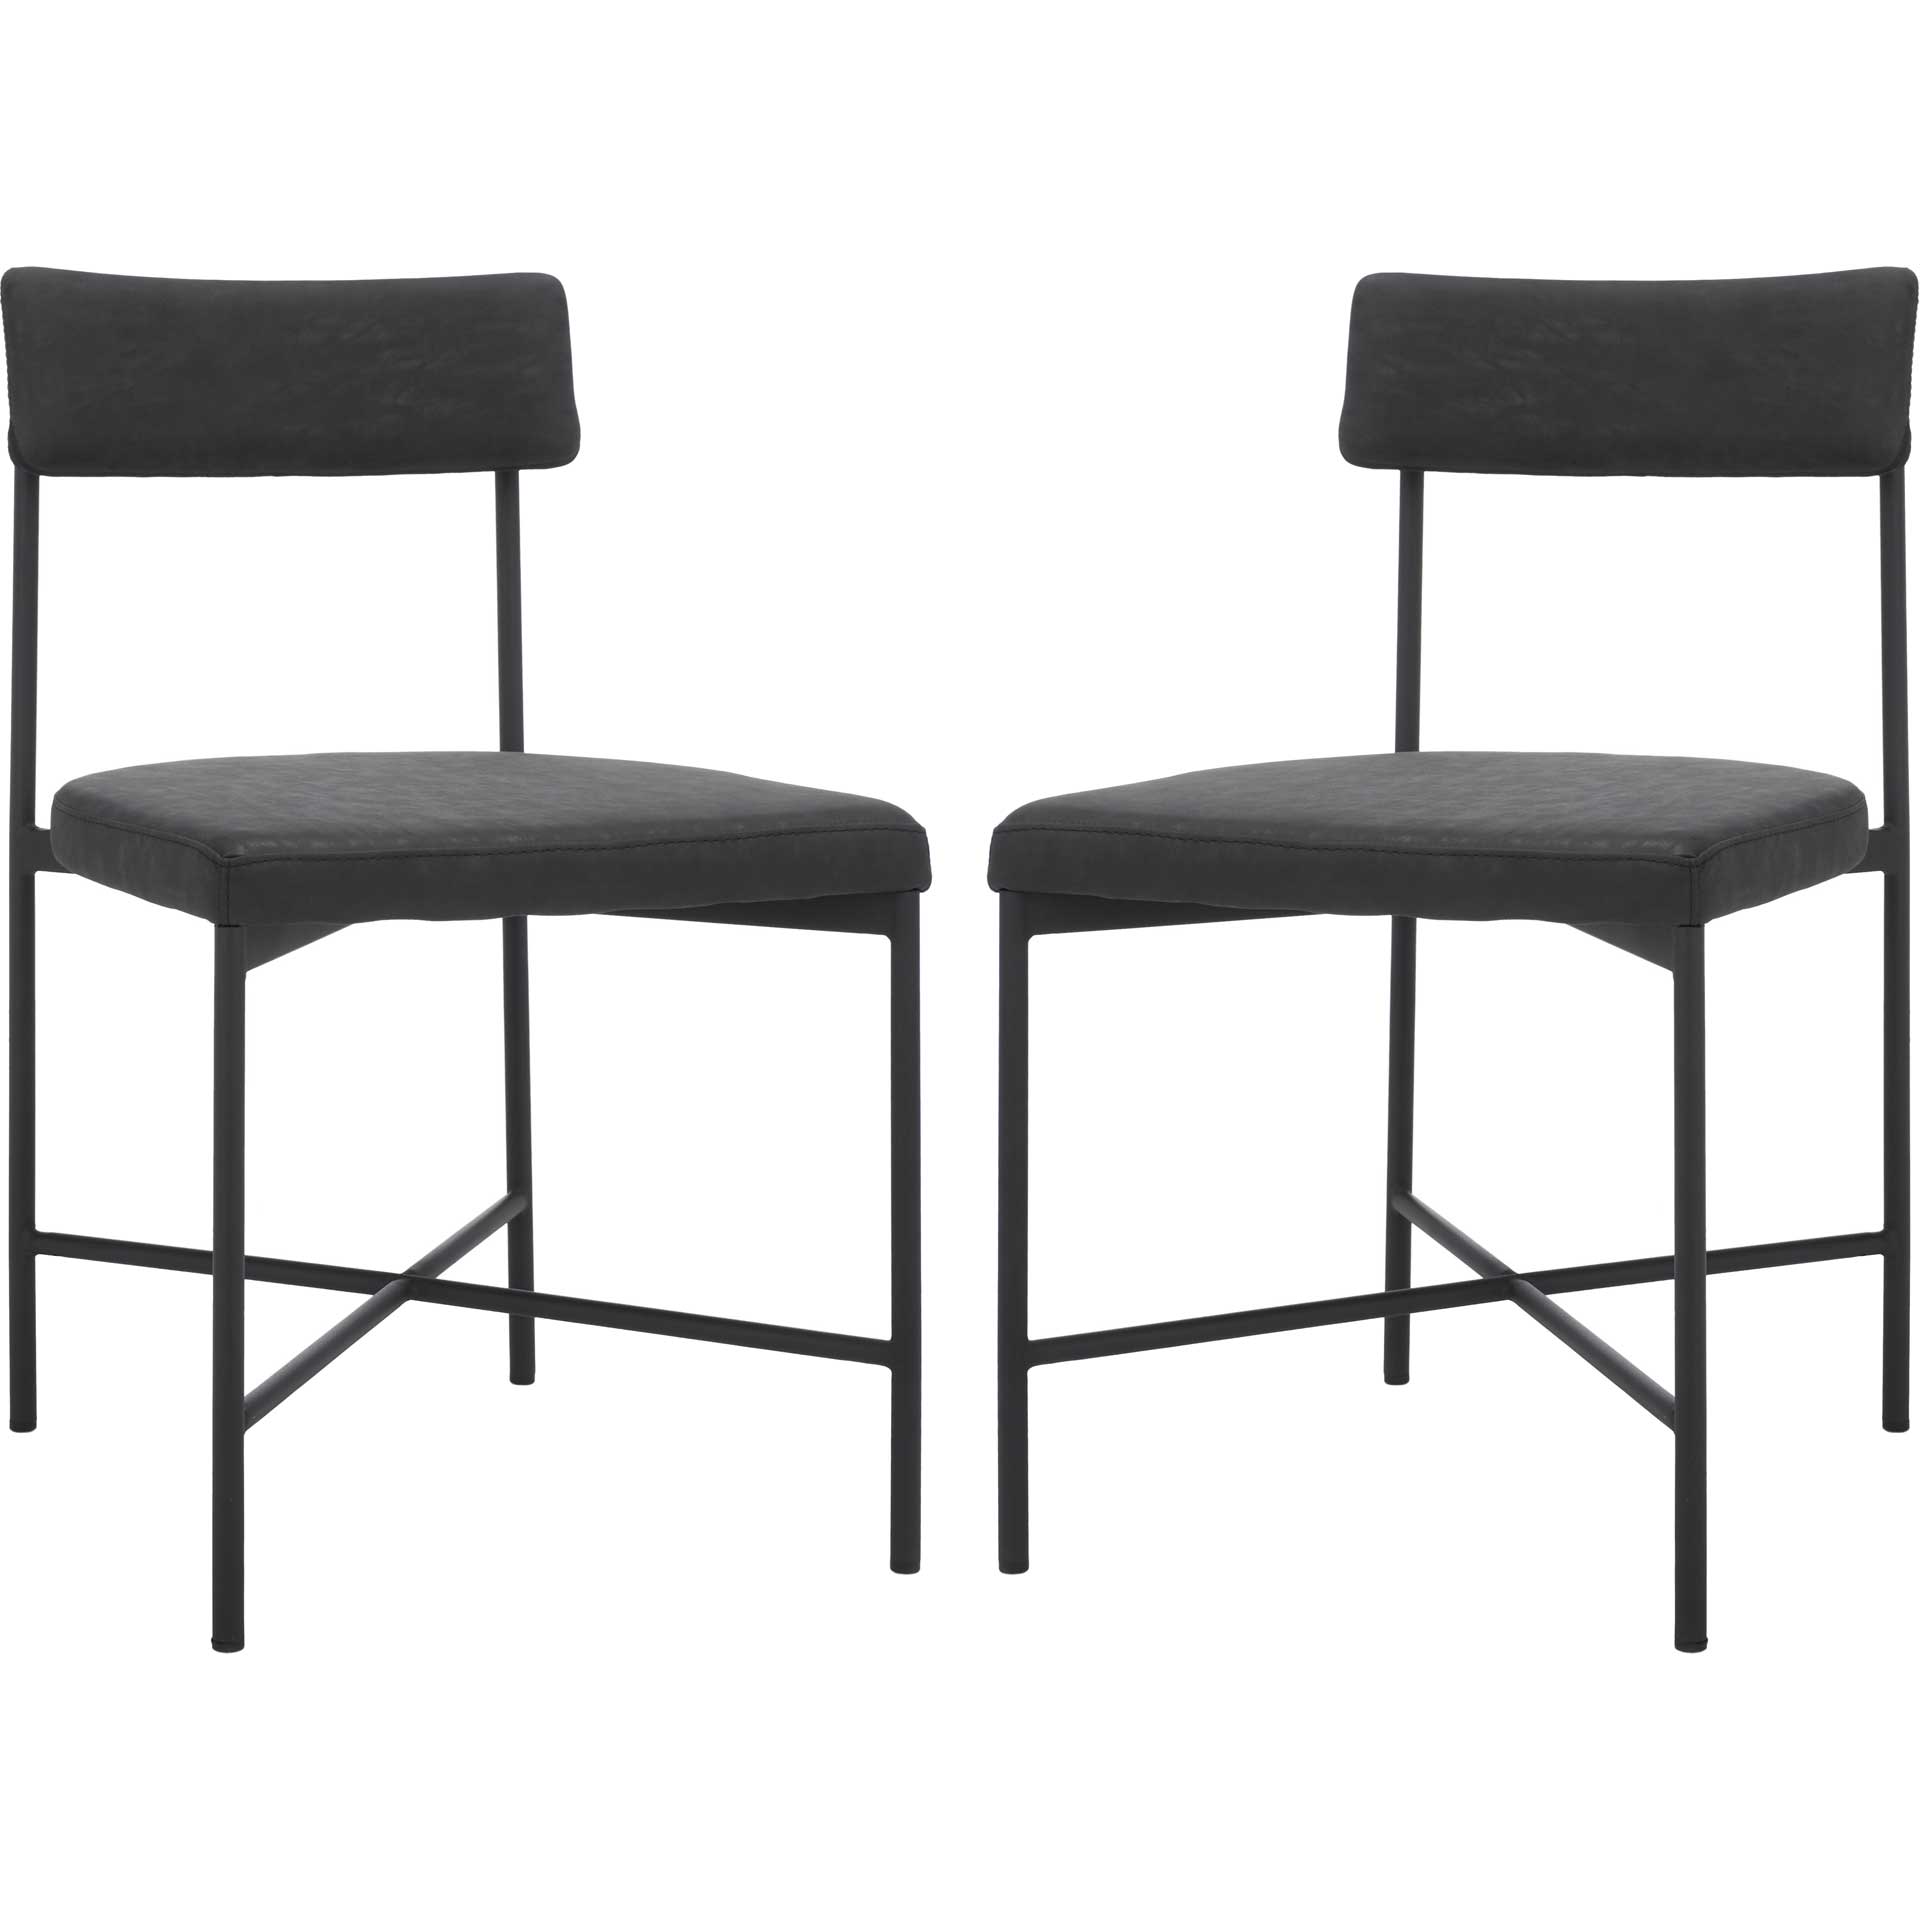 Arden Dining Chairs Black (Set of 2)